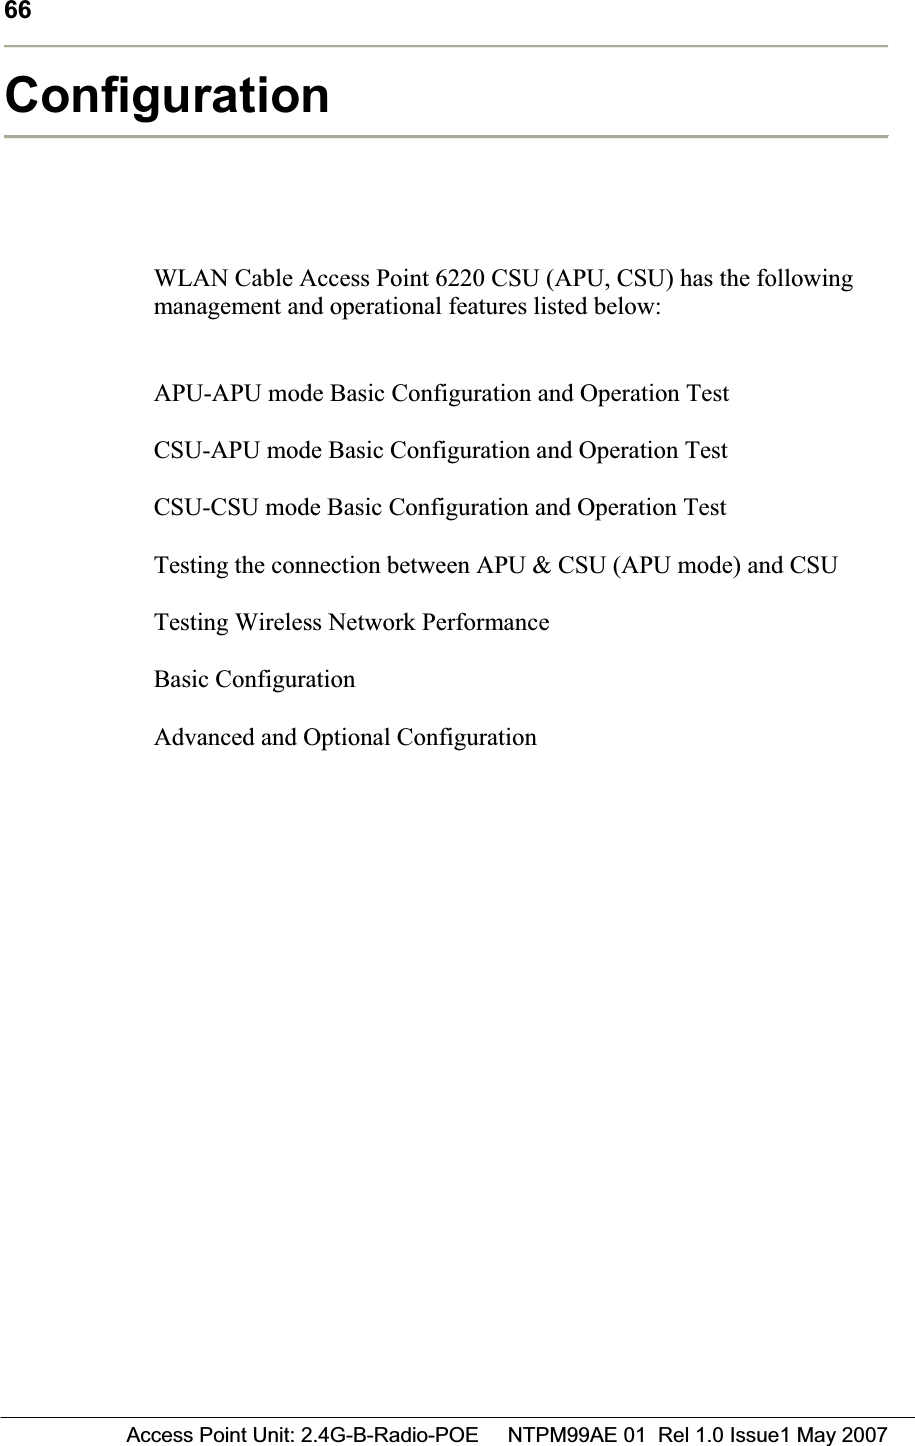 66 Access Point Unit: 2.4G-B-Radio-POE     NTPM99AE 01  Rel 1.0 Issue1 May 2007ConfigurationWLAN Cable Access Point 6220 CSU (APU, CSU) has the following management and operational features listed below: APU-APU mode Basic Configuration and Operation Test CSU-APU mode Basic Configuration and Operation Test CSU-CSU mode Basic Configuration and Operation Test Testing the connection between APU &amp; CSU (APU mode) and CSU Testing Wireless Network Performance Basic Configuration Advanced and Optional Configuration 